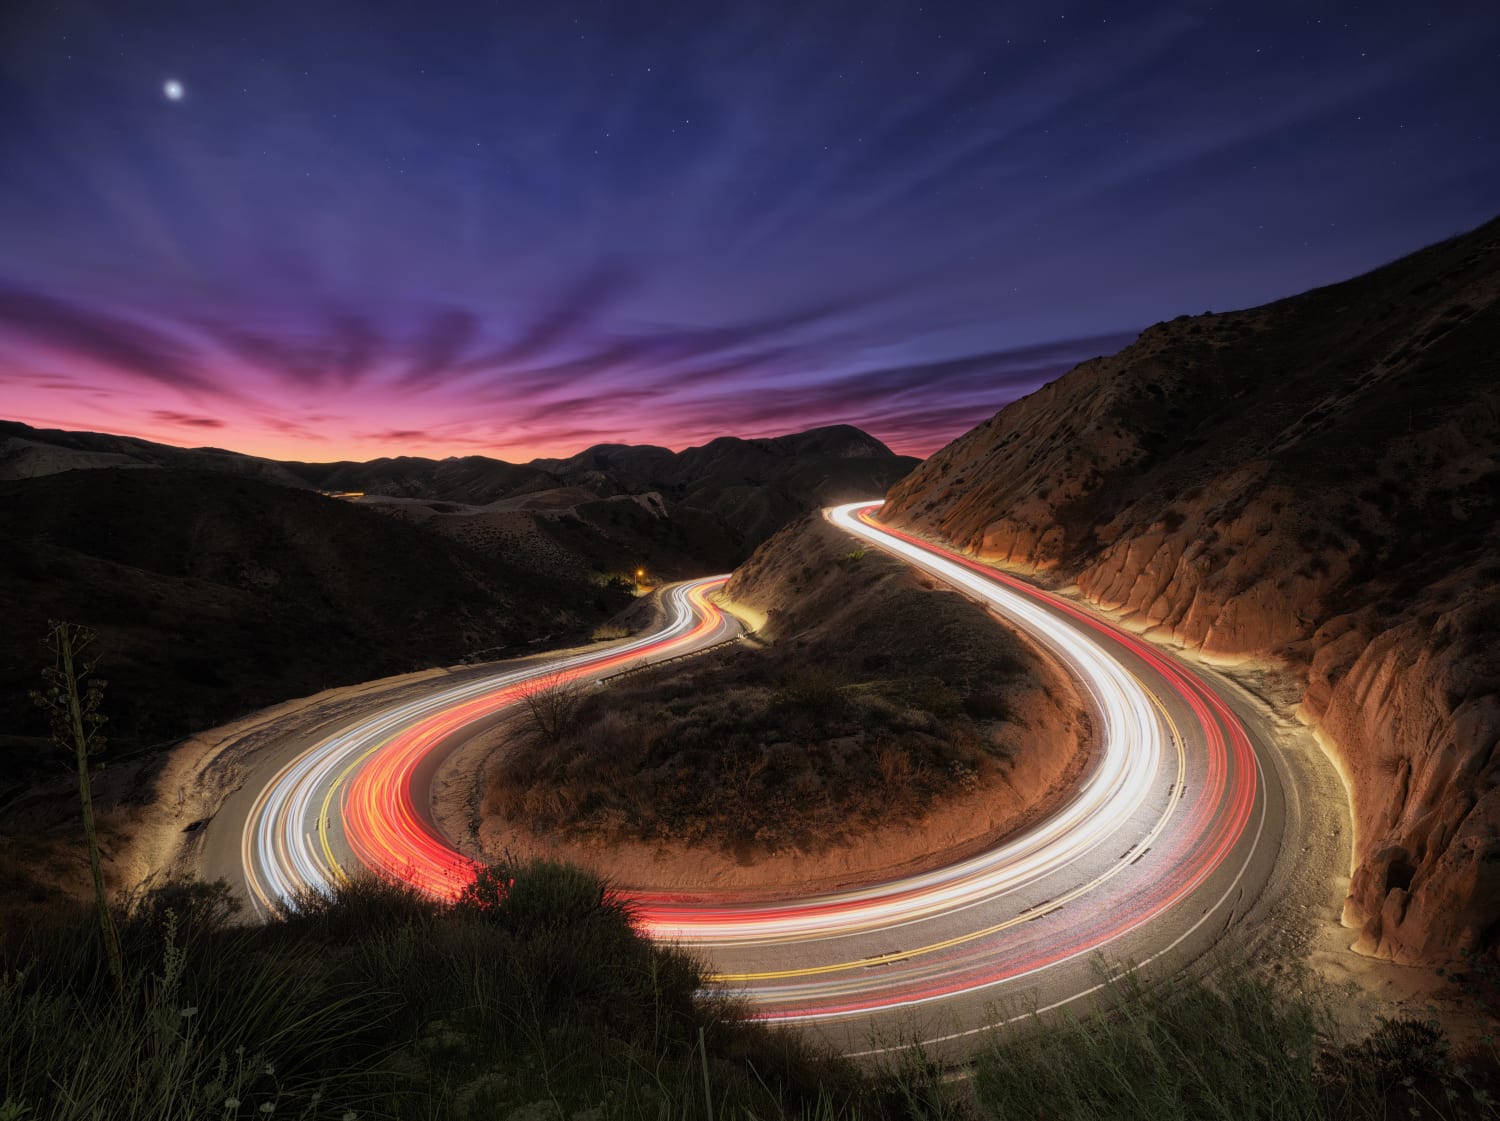 The bustle of cars driving through Grimmes Canyon, CA